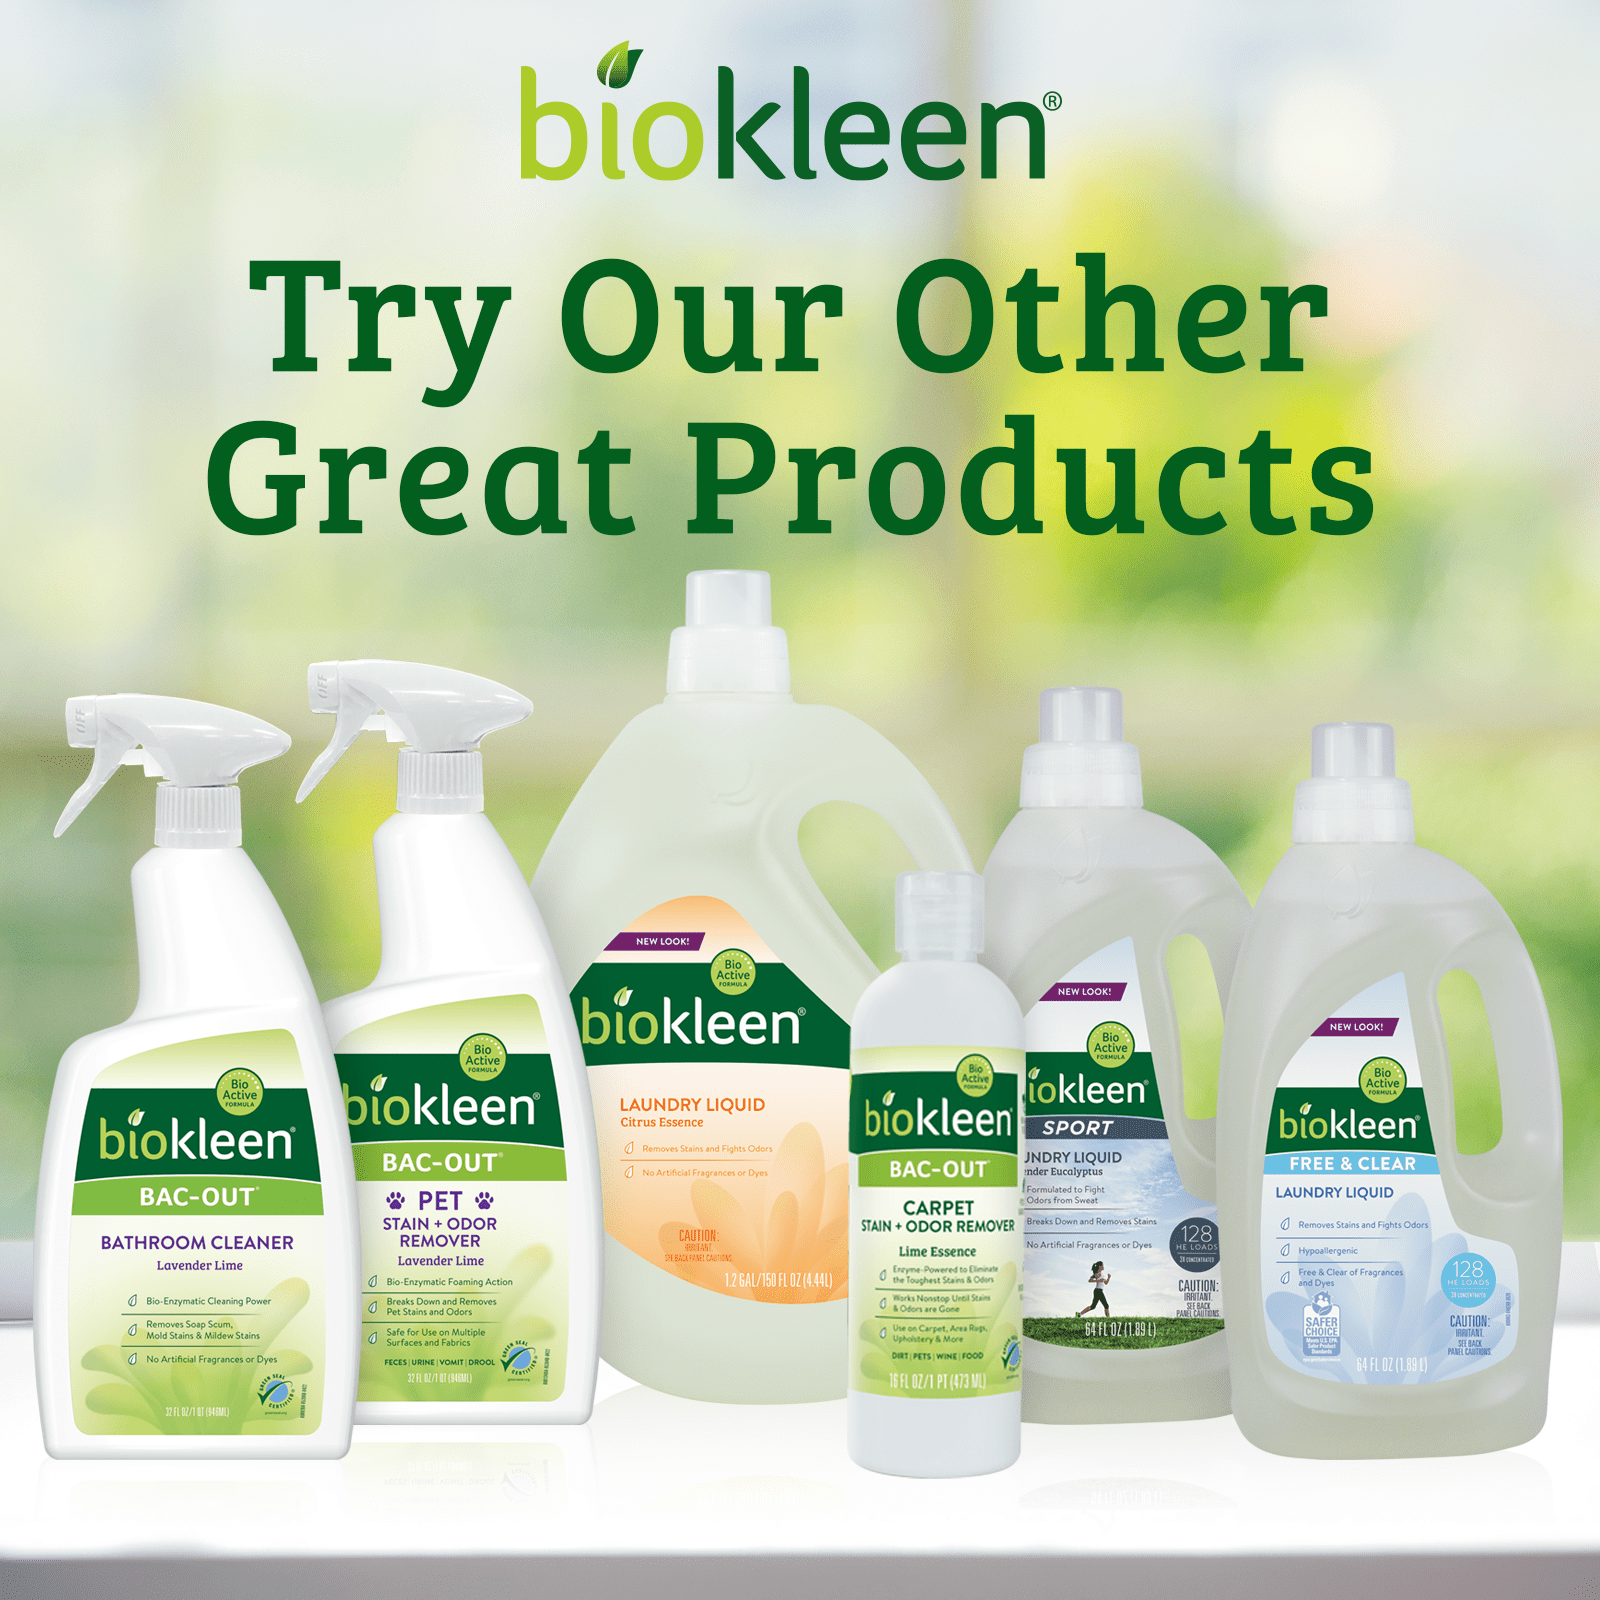 Biokleen Bac-Out Stain Odor Remover 32fl oz Natural Enzymatic Foam